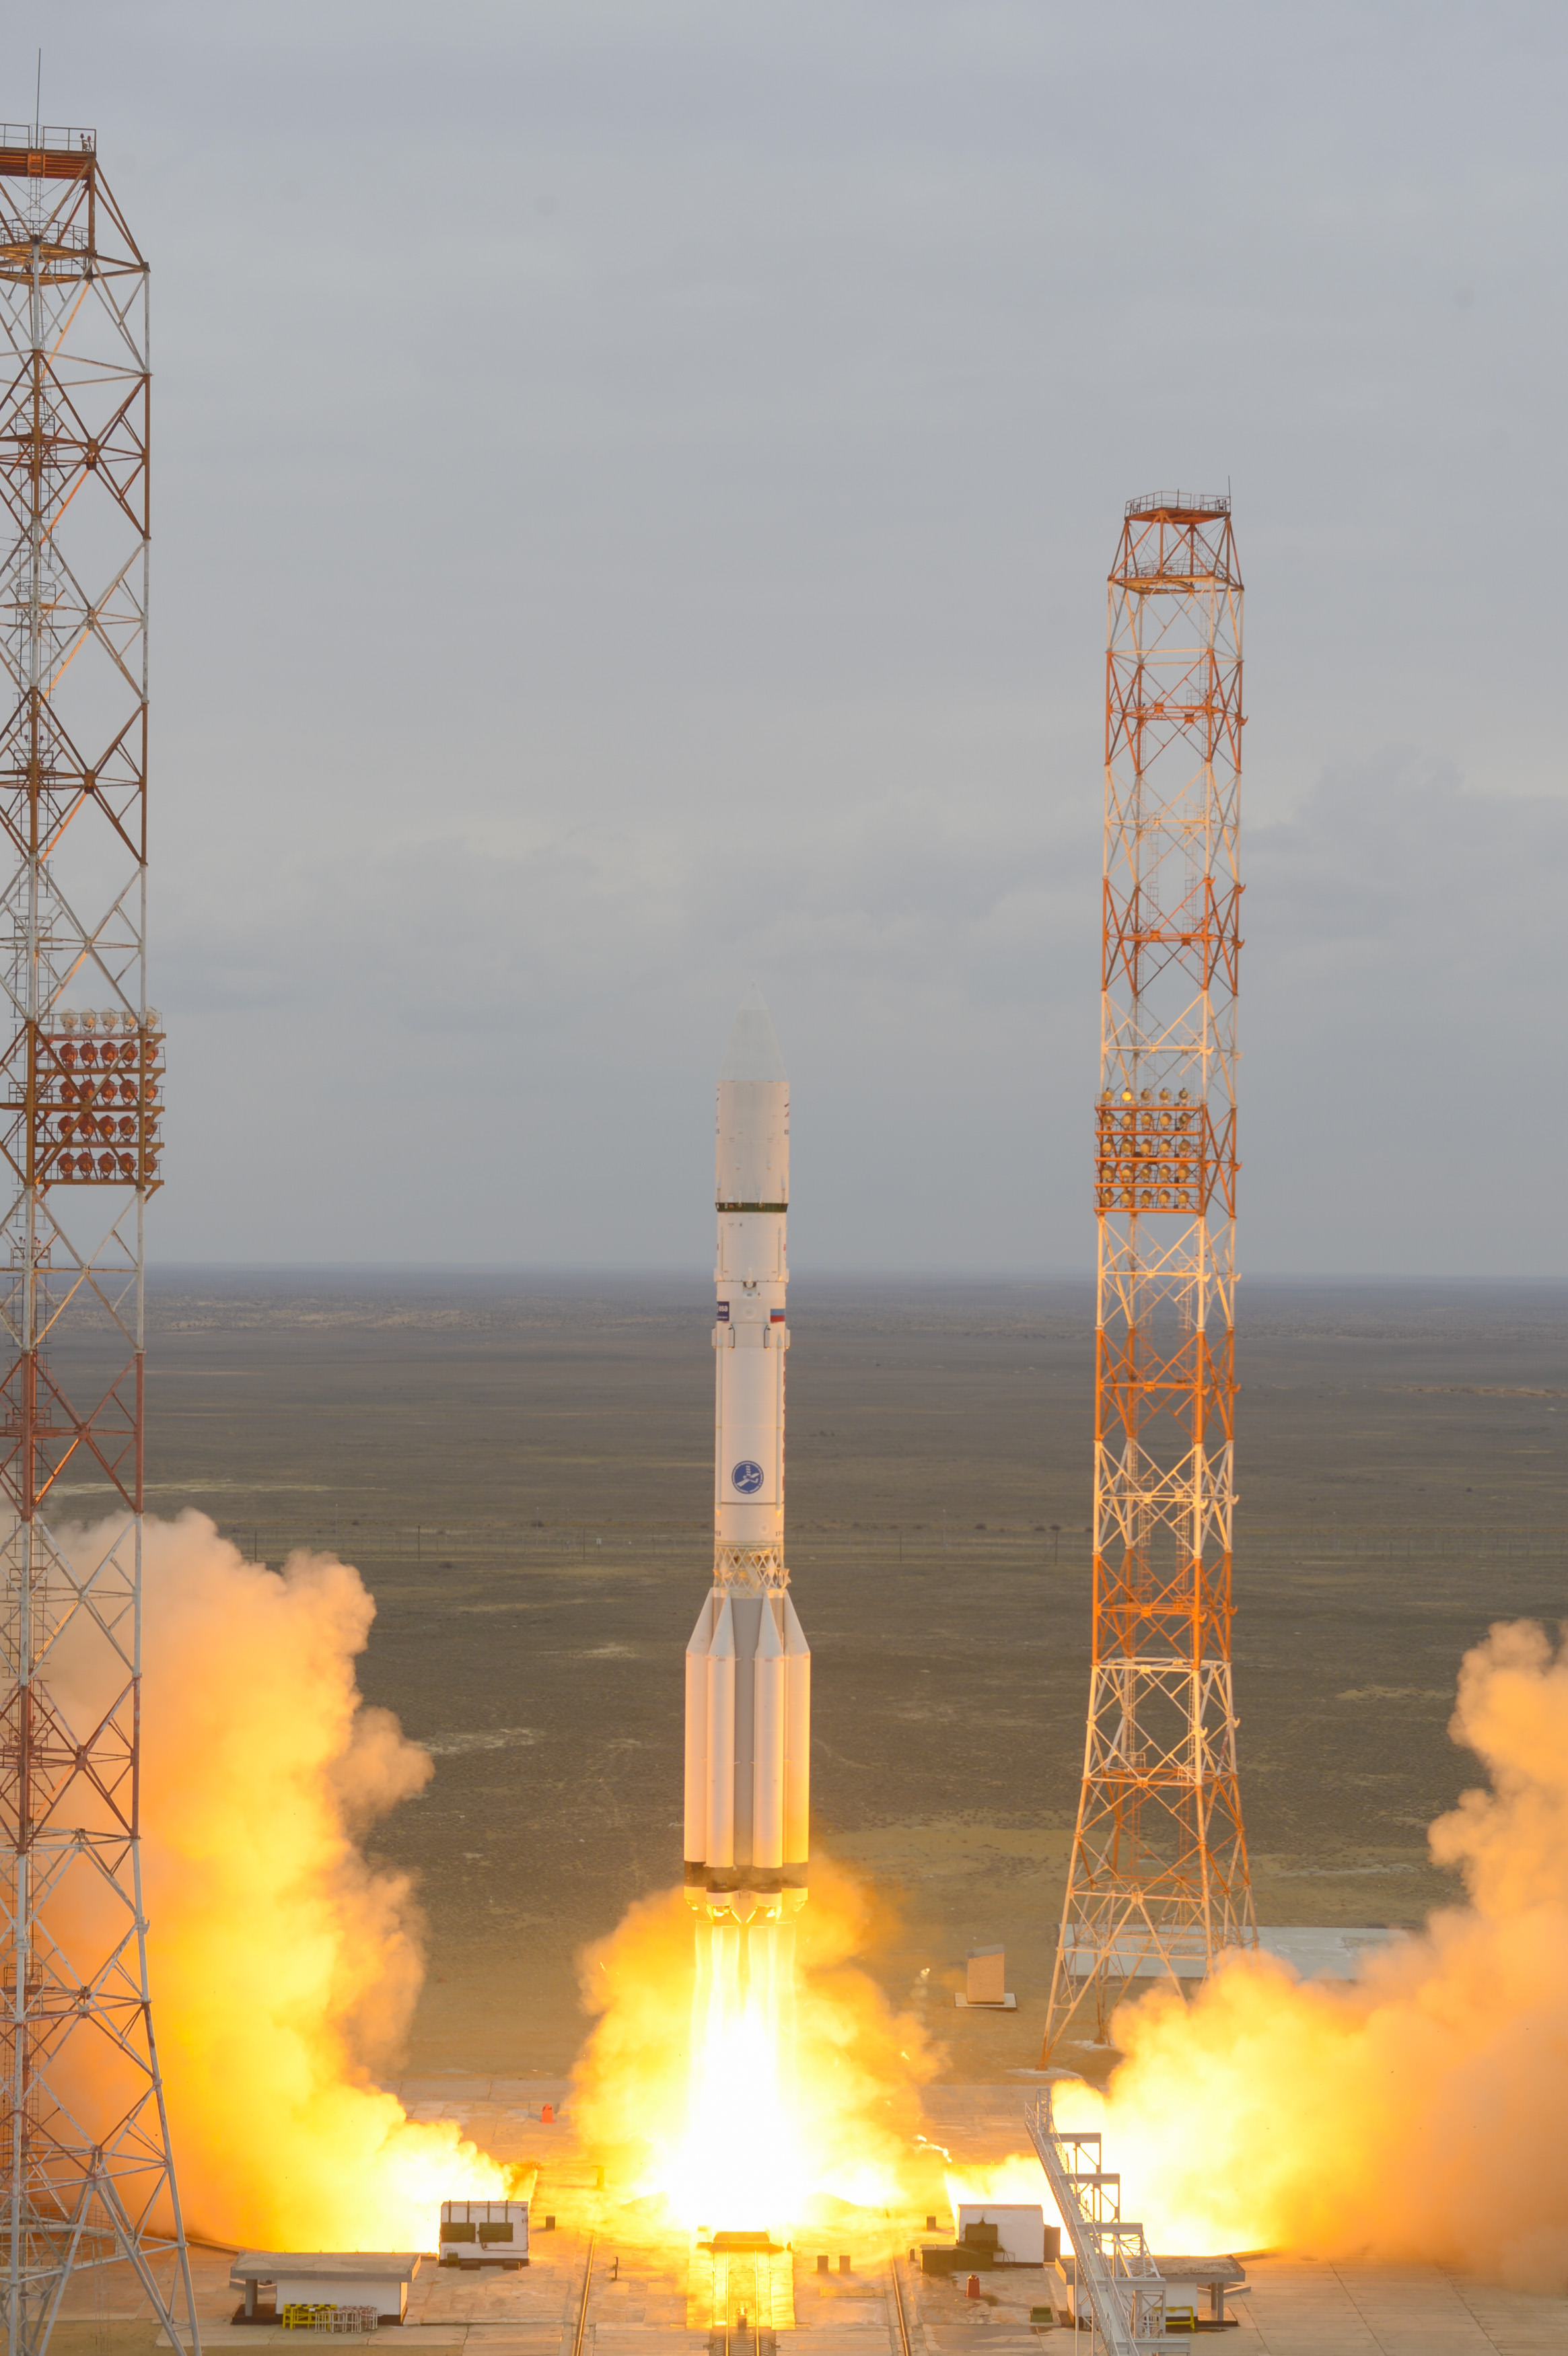 ExoMars 2016 lifted off on a Proton-M rocket from Baikonur, Kazakhstan at 09:31 GMT on 14 March 2016.   Copyright ESA–Stephane Corvaja, 2016